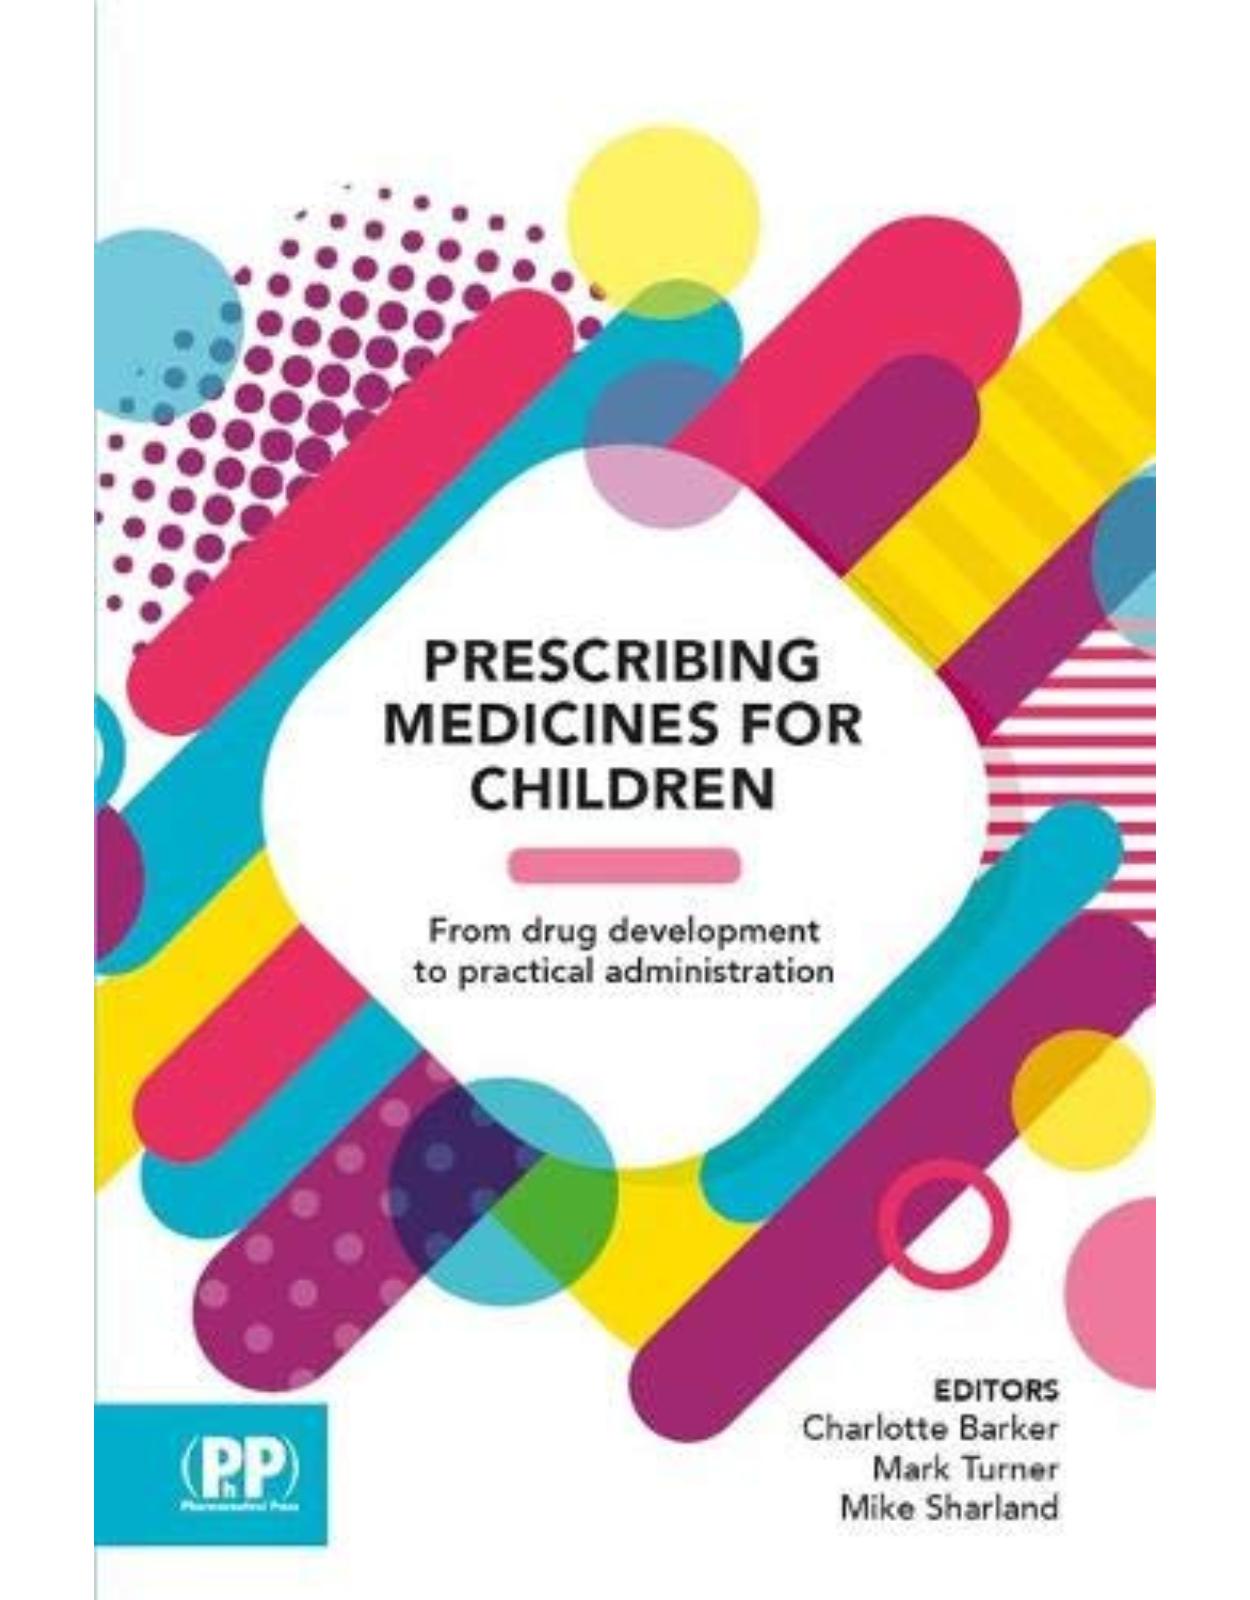 Prescribing Medicines for Children. 1st edition. From drug development to practical administration